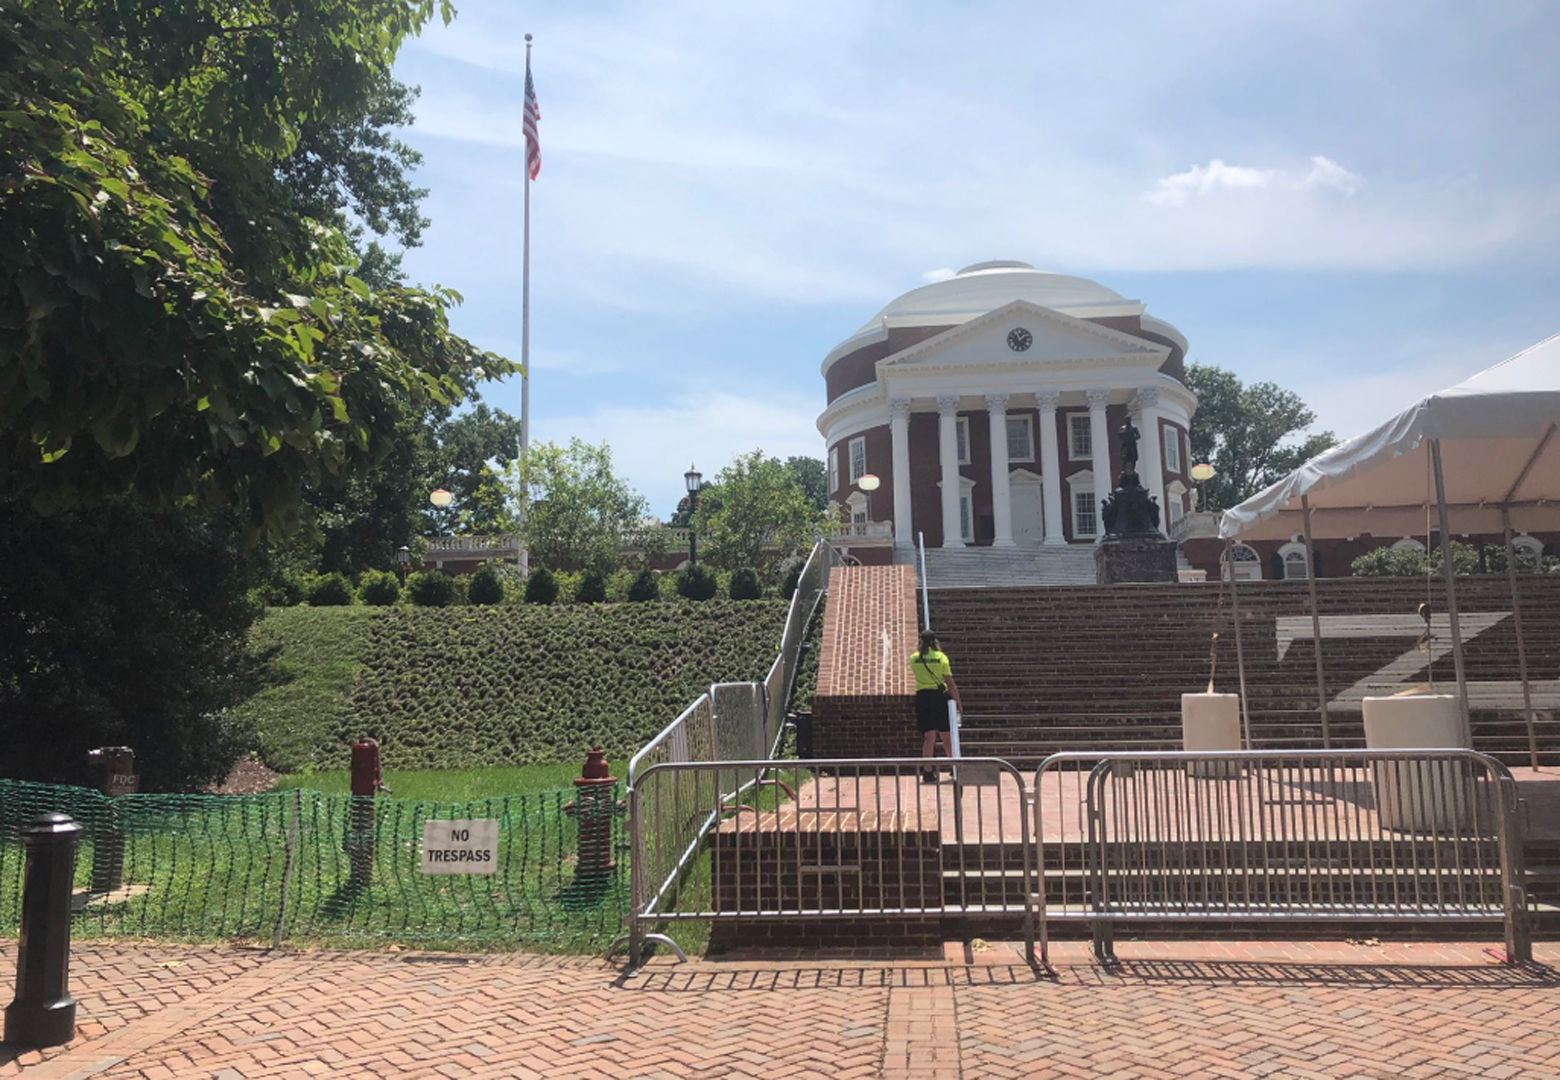 At UVa., “no trespass” signs and barricades surround the rotunda ahead of a Saturday morning “reflection and renewal” university event with tight security and planned protests on Grounds. (WTOP/Max Smith)